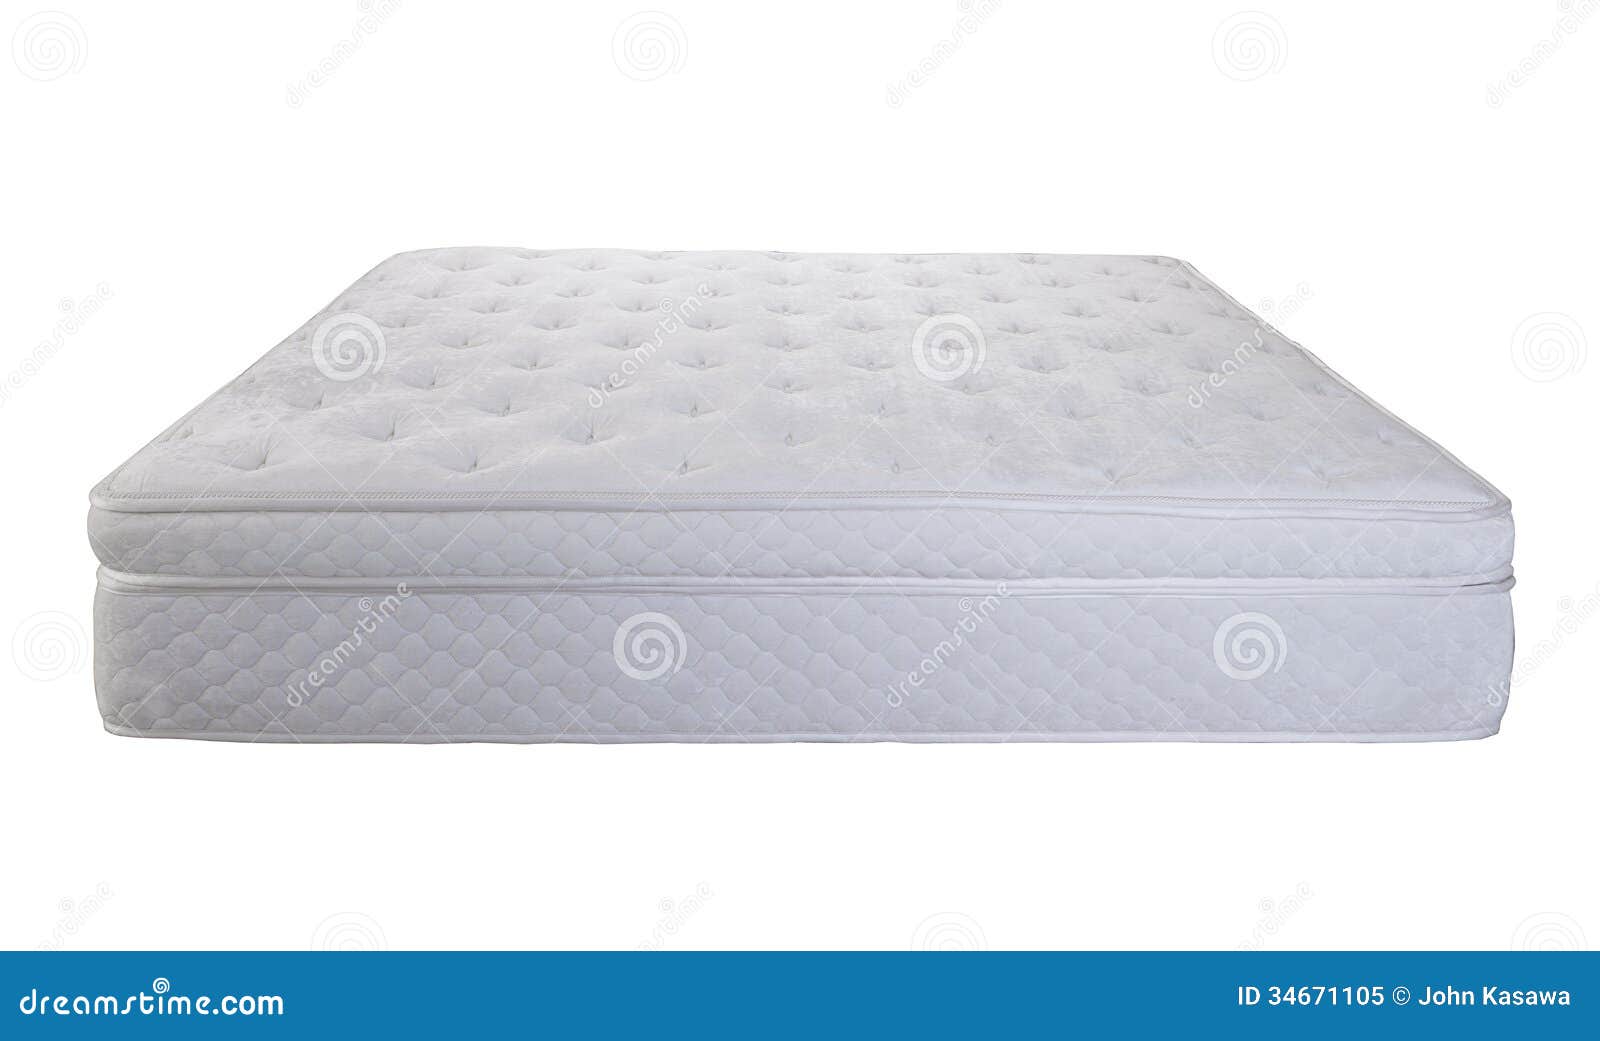 Soft and comfort mattress spring bed a nice bedroom accessories ...